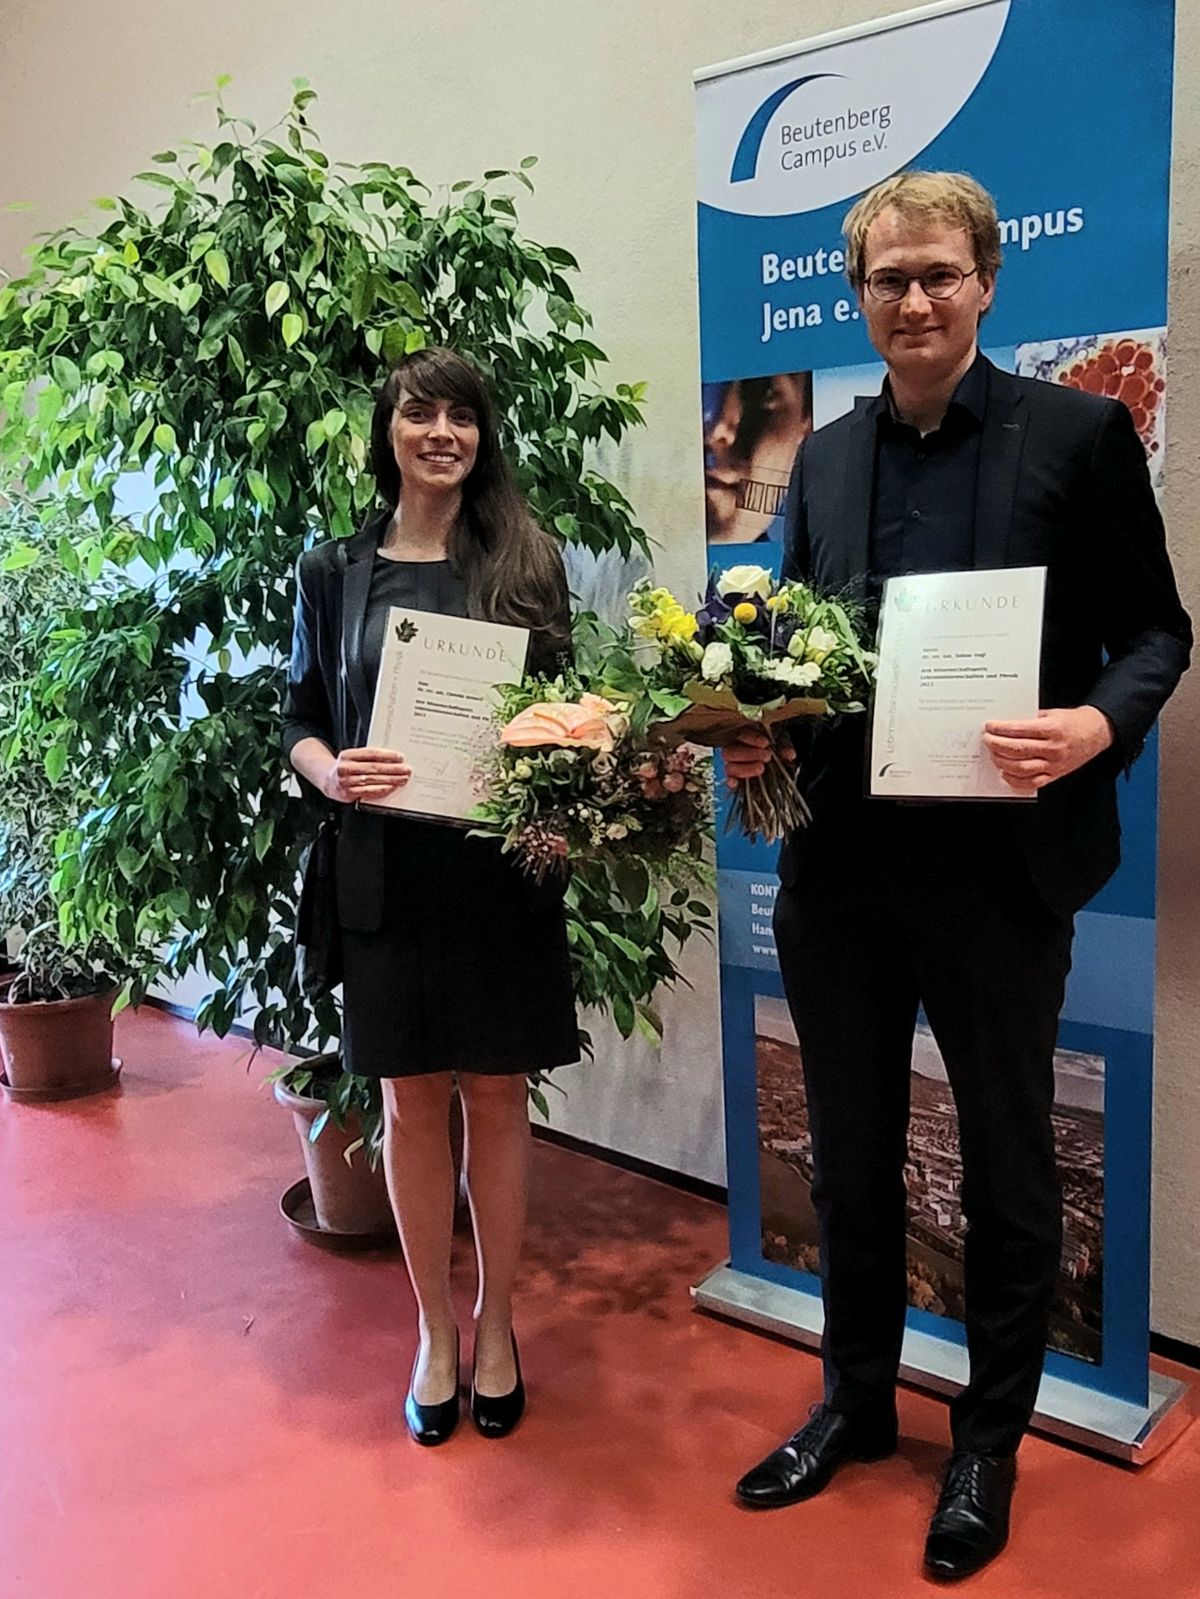 This year, Dr. Christin Reimer and Dr. Tobias Vogl were awarded the Science Prizes Life Sciences and Physics.